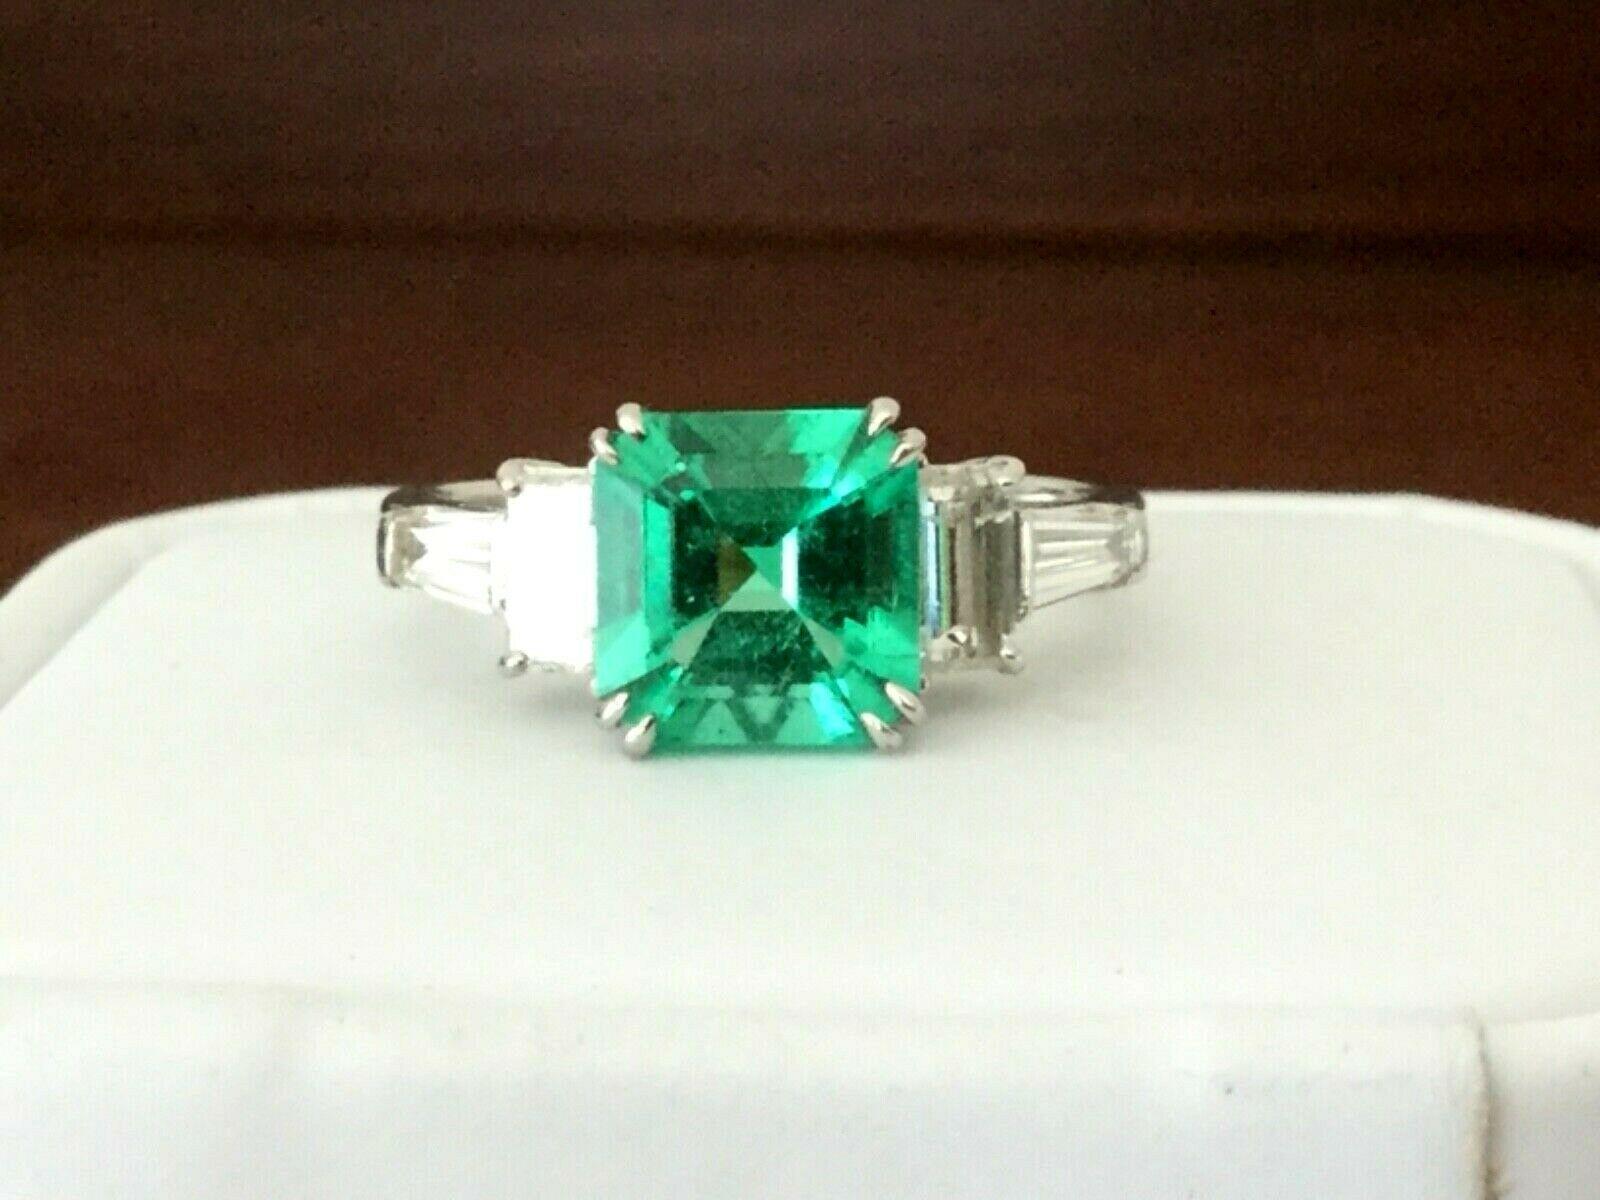 For your consideration is an ULTRA-RARE UNTREATED 2.04 carat octagonal shaped, natural, transparent, green emerald set in a brand new 18k white gold setting with .90 carats of natural G color SI clarity white diamonds.  The untreated emerald is GIA